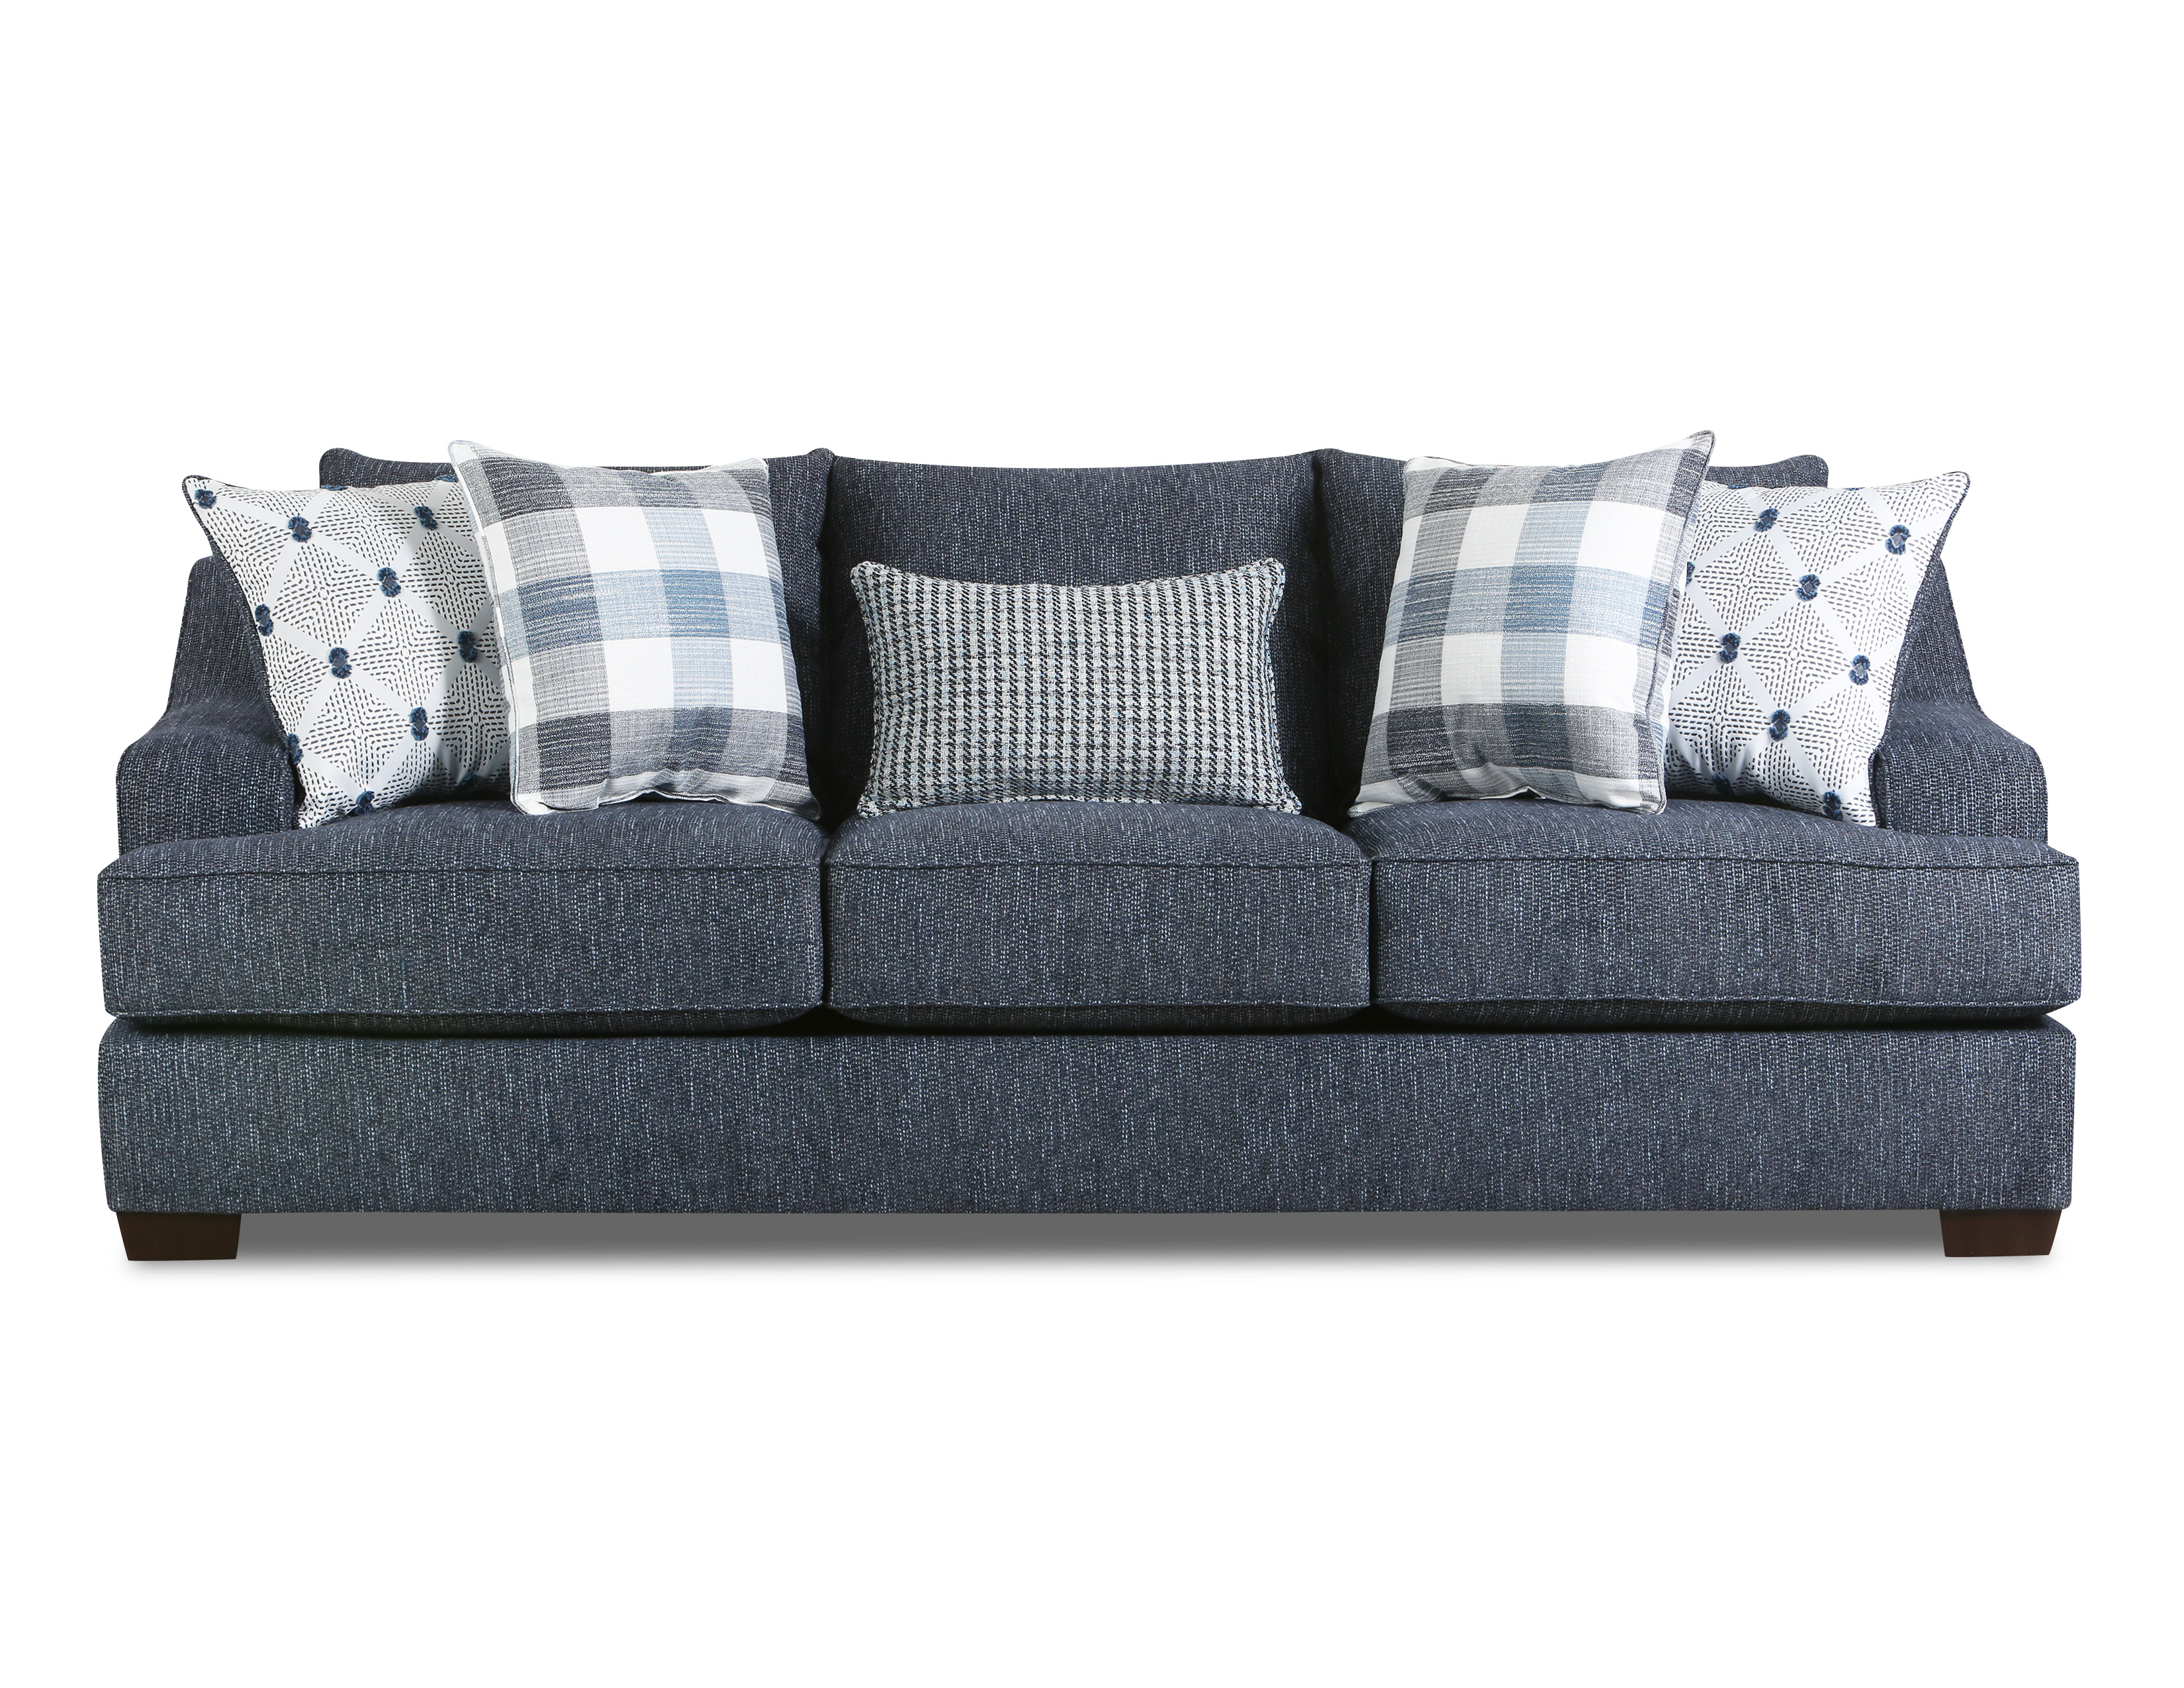 Indigo Sofa with Pocketed Coil Cushions